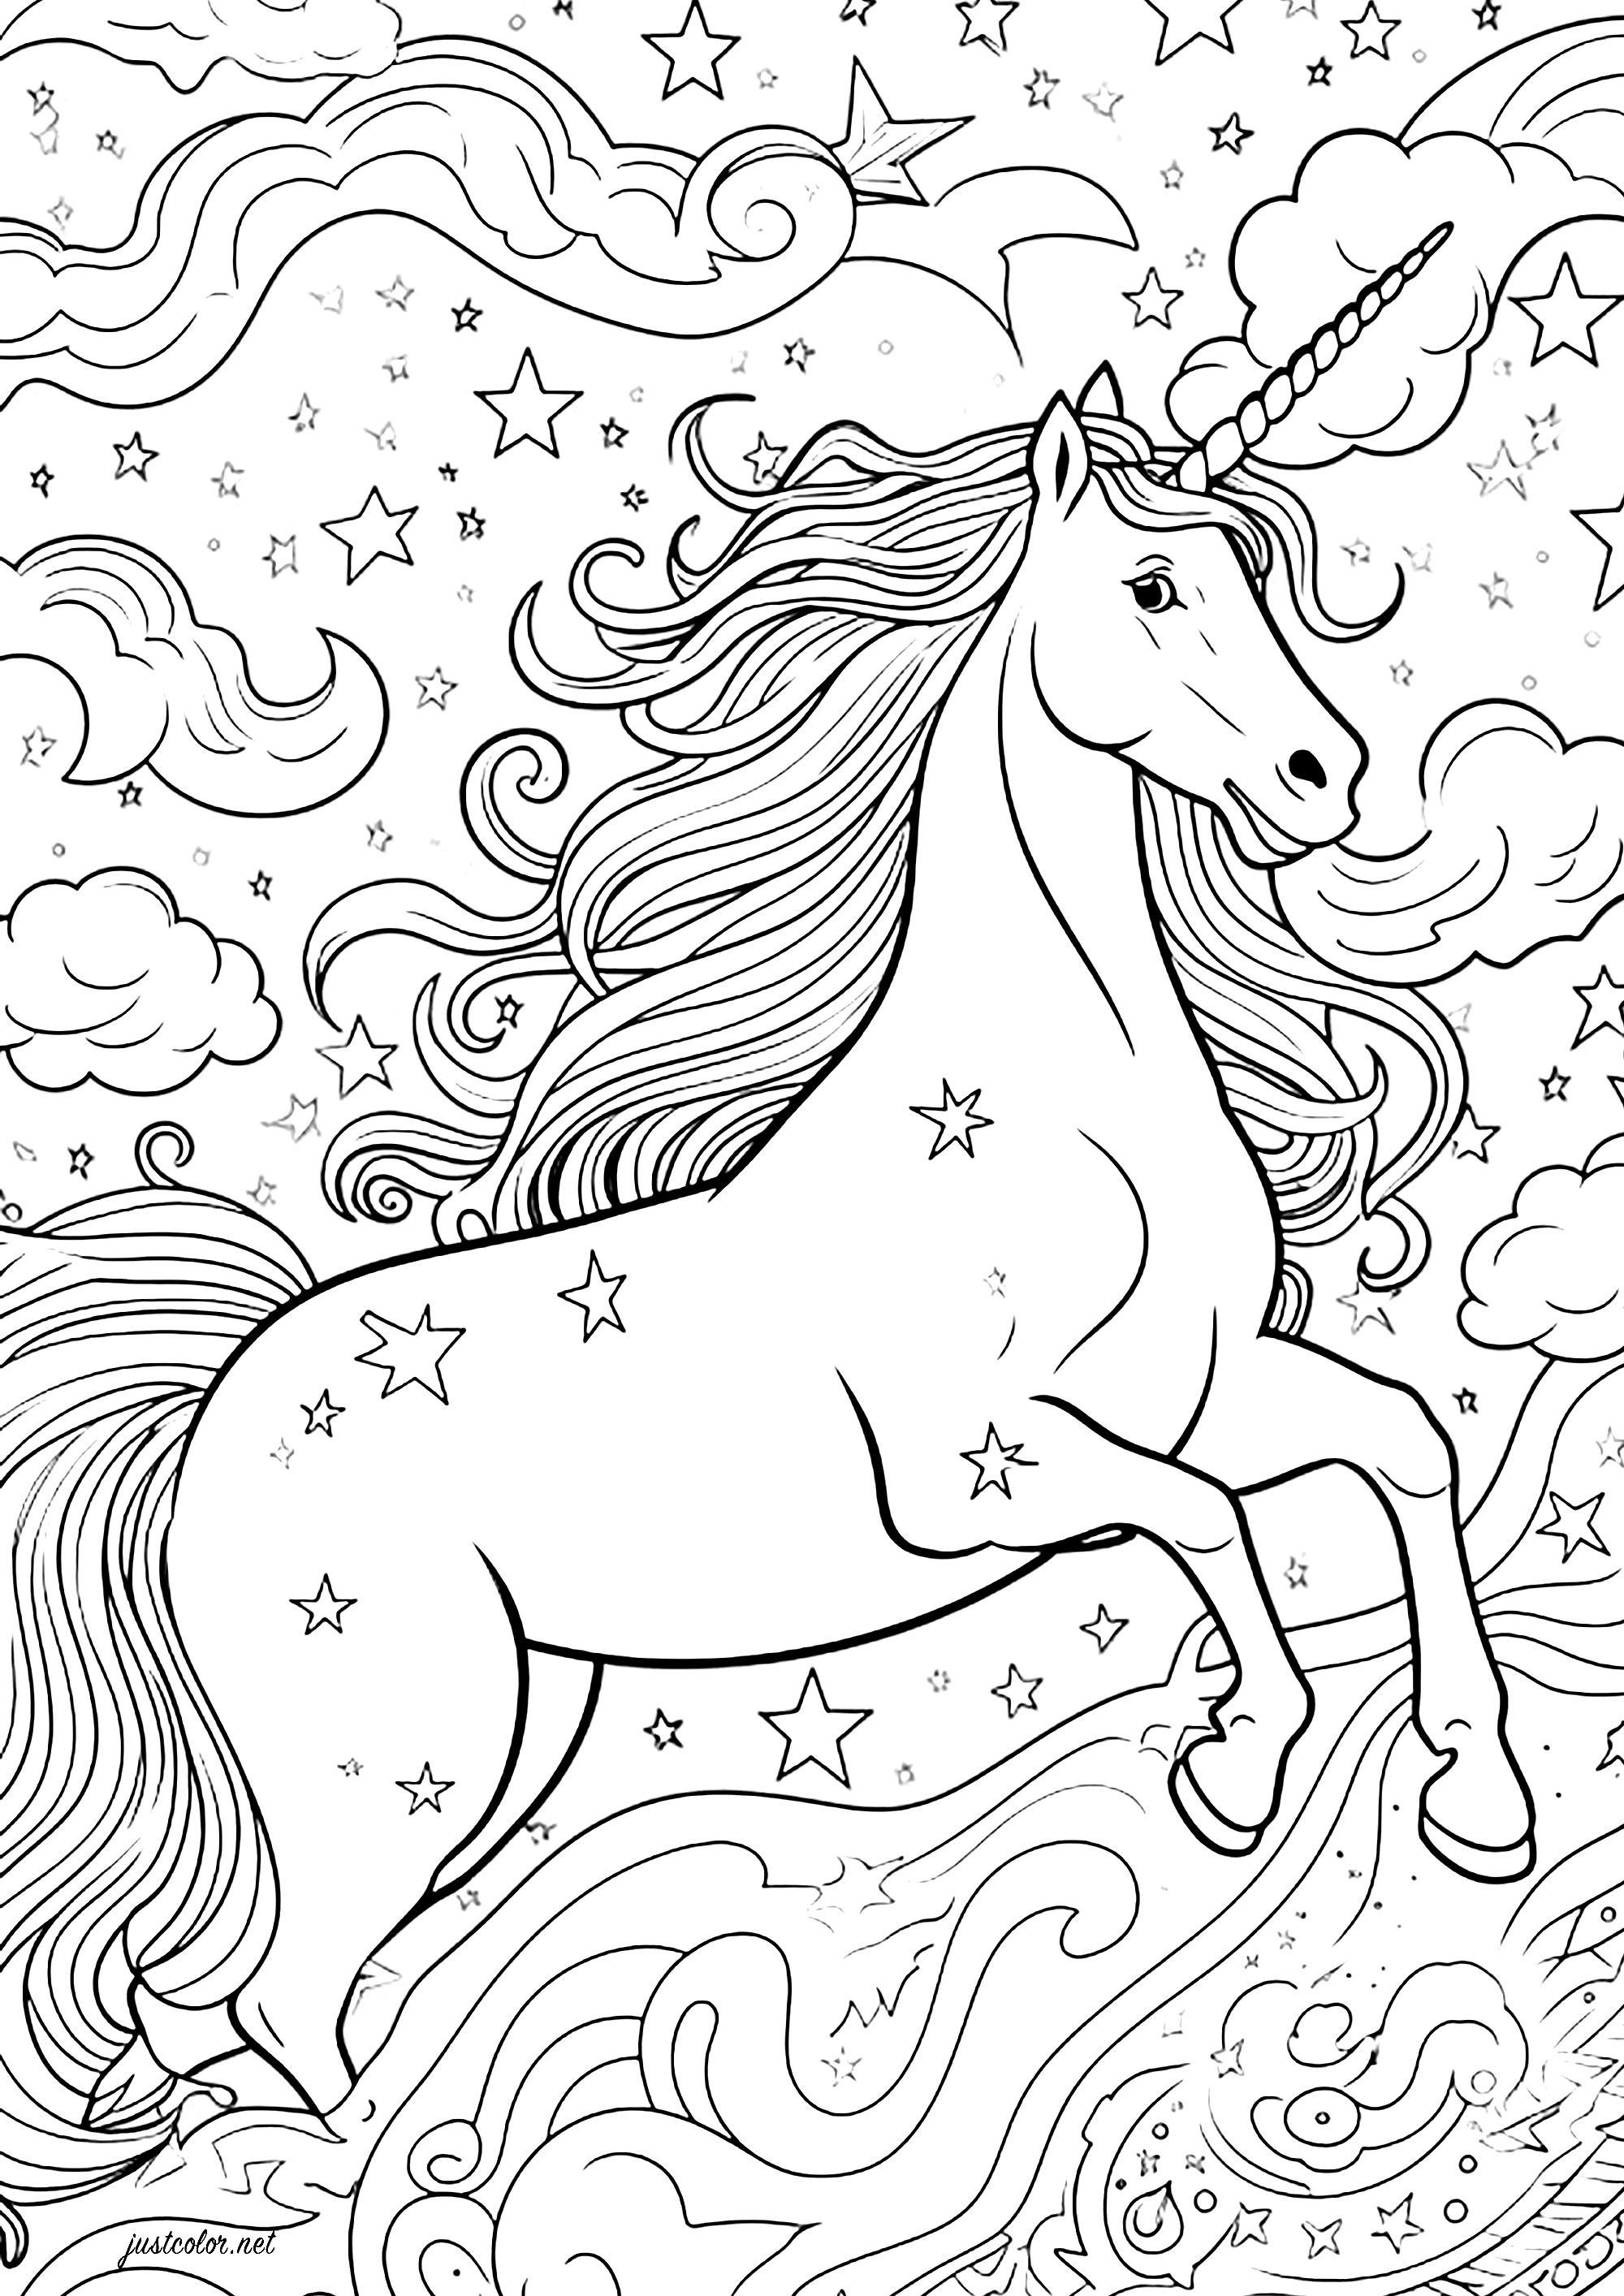 Unicorn in the sky, with pretty clouds and stars